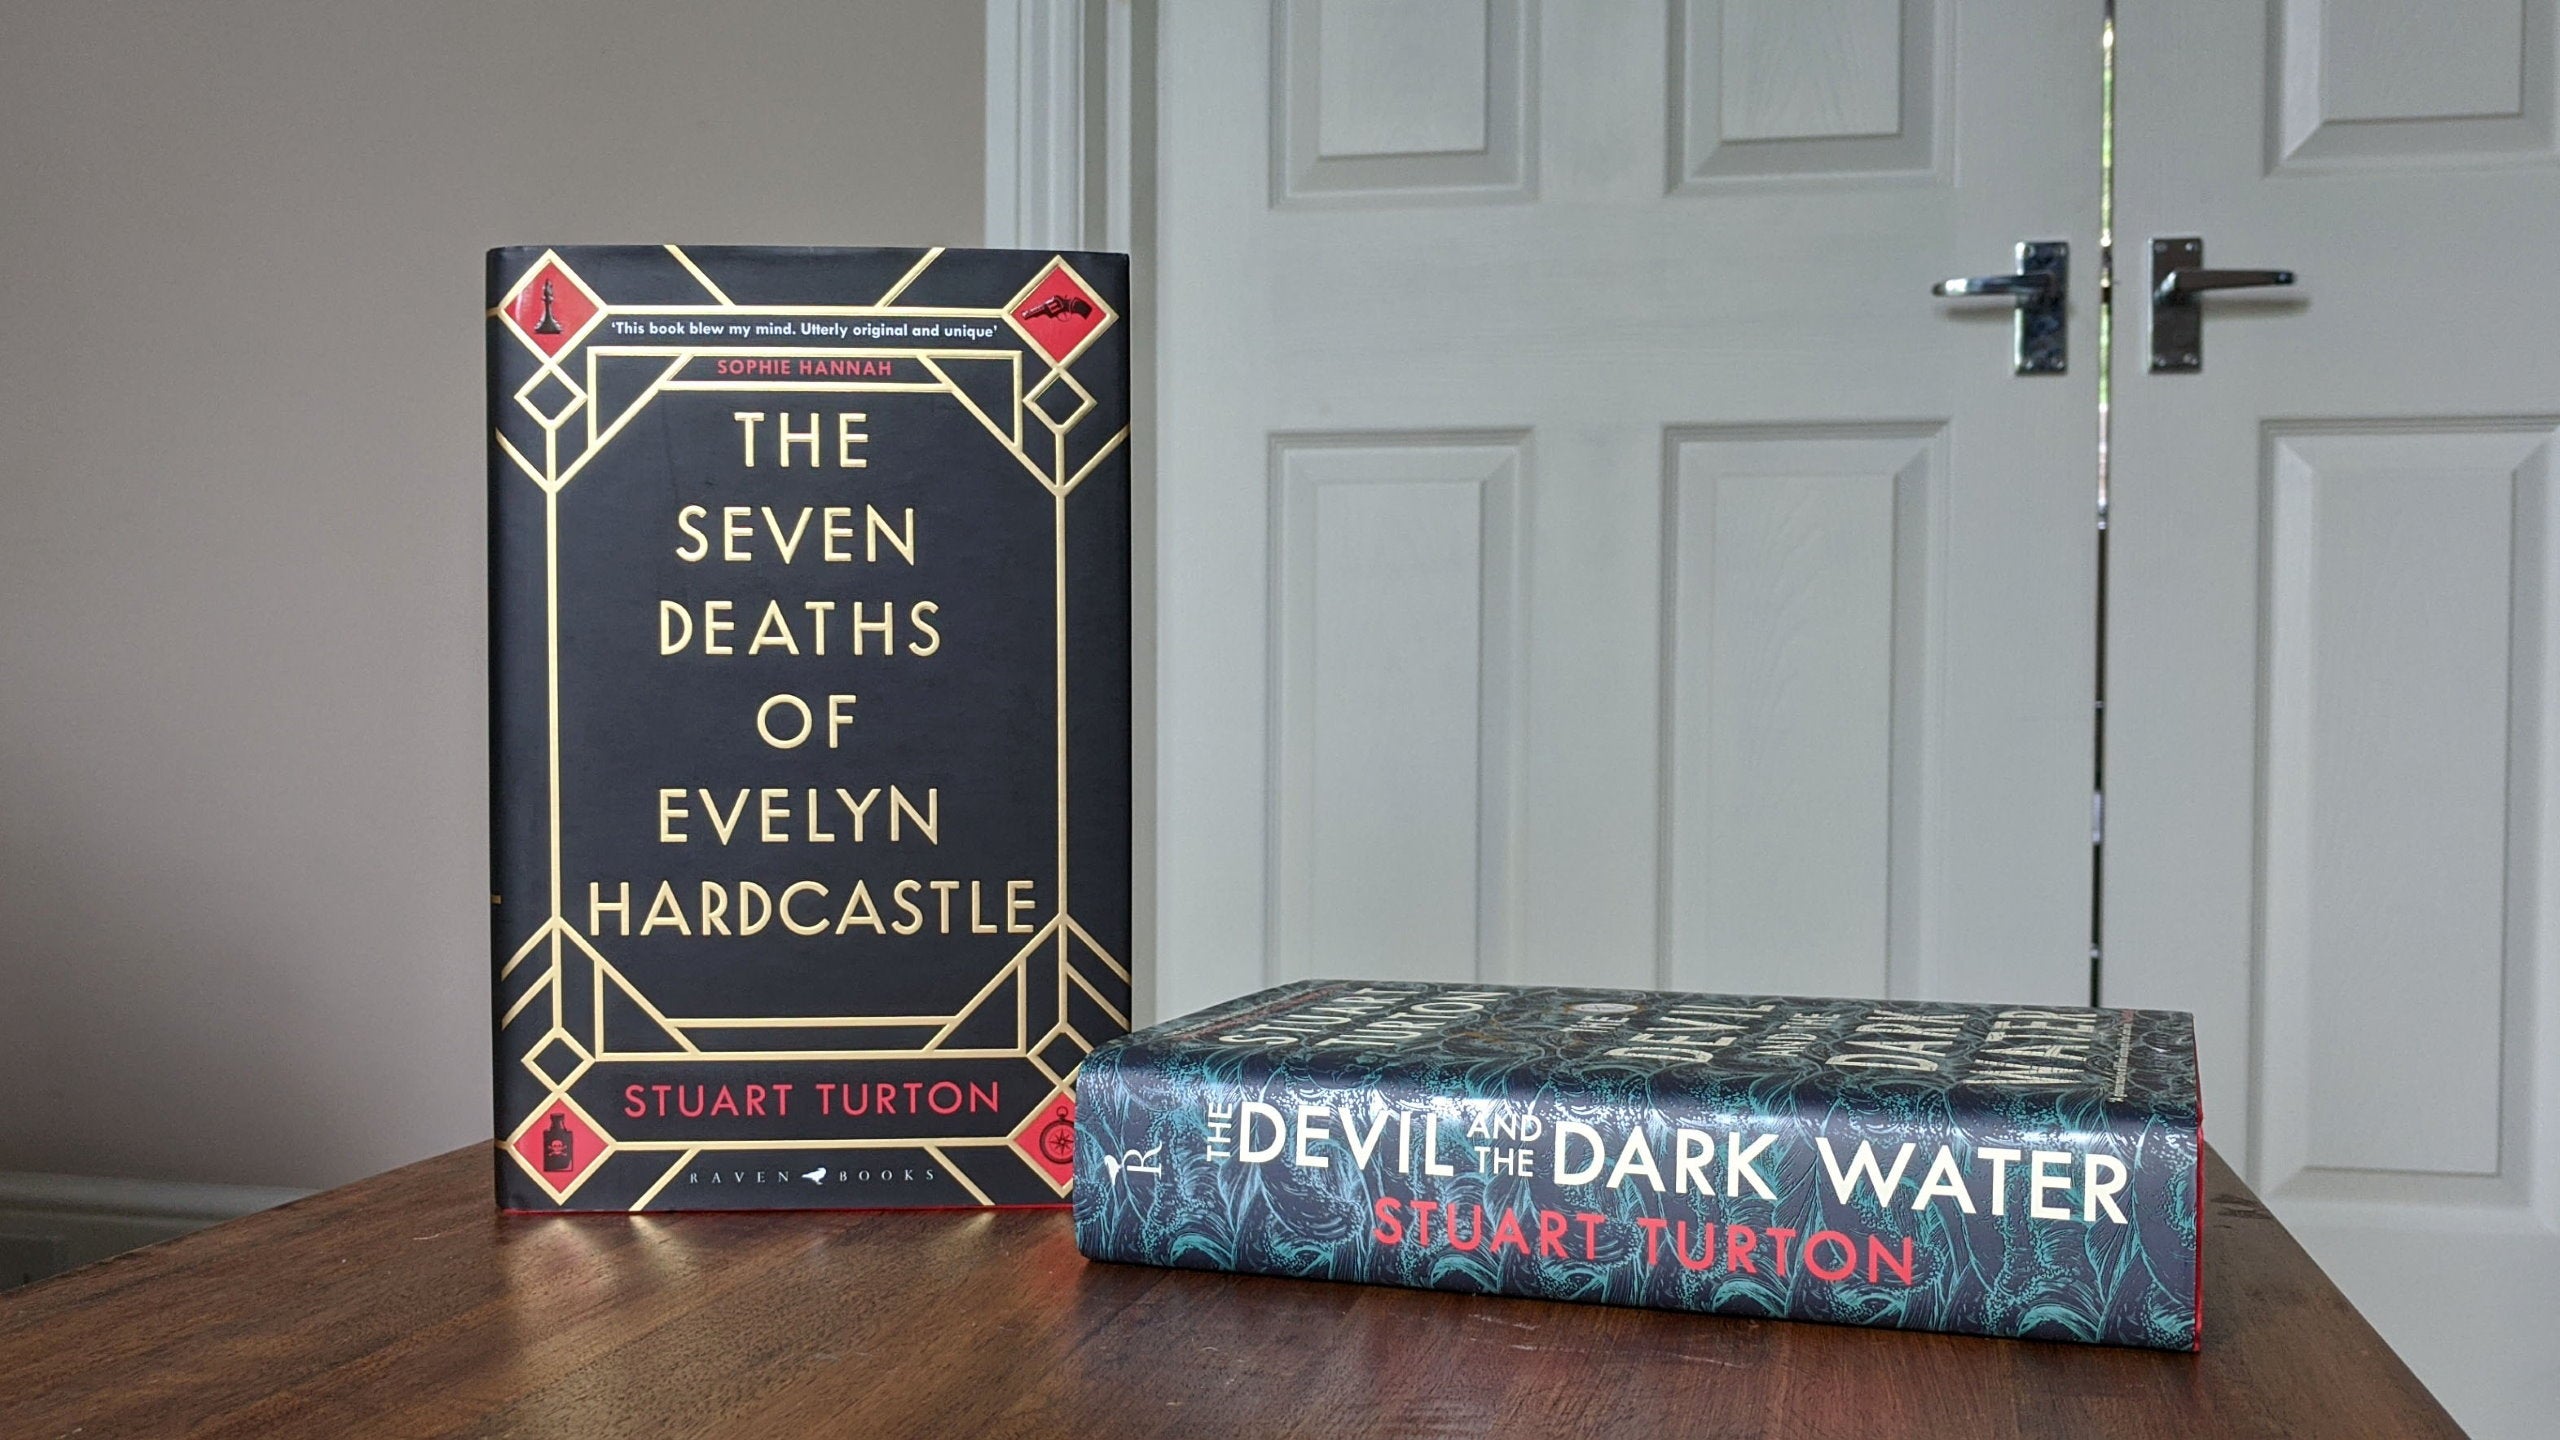 Stuart Turton's books The Seven Deaths Of Evelyn Hardcastle and The Devil In The Dark Water